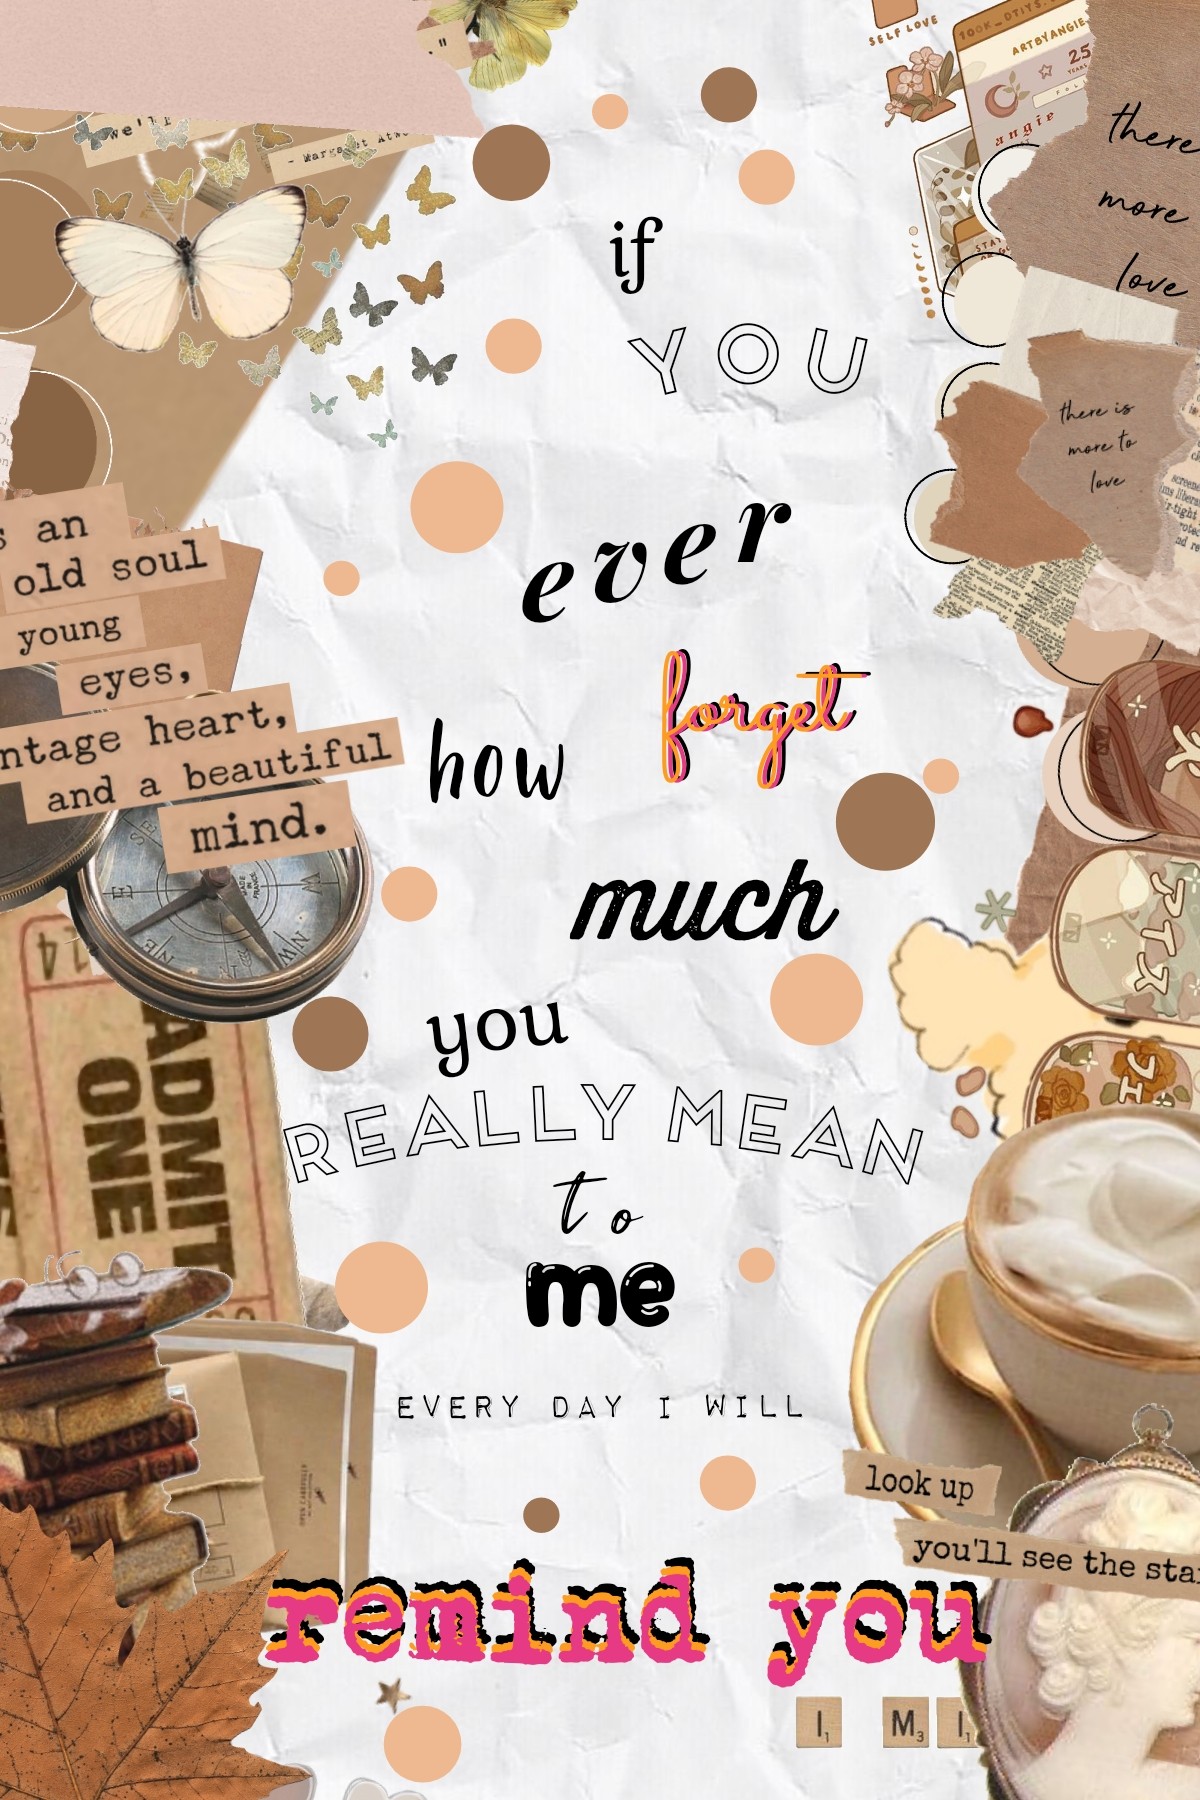 Collage by flowercrowns-